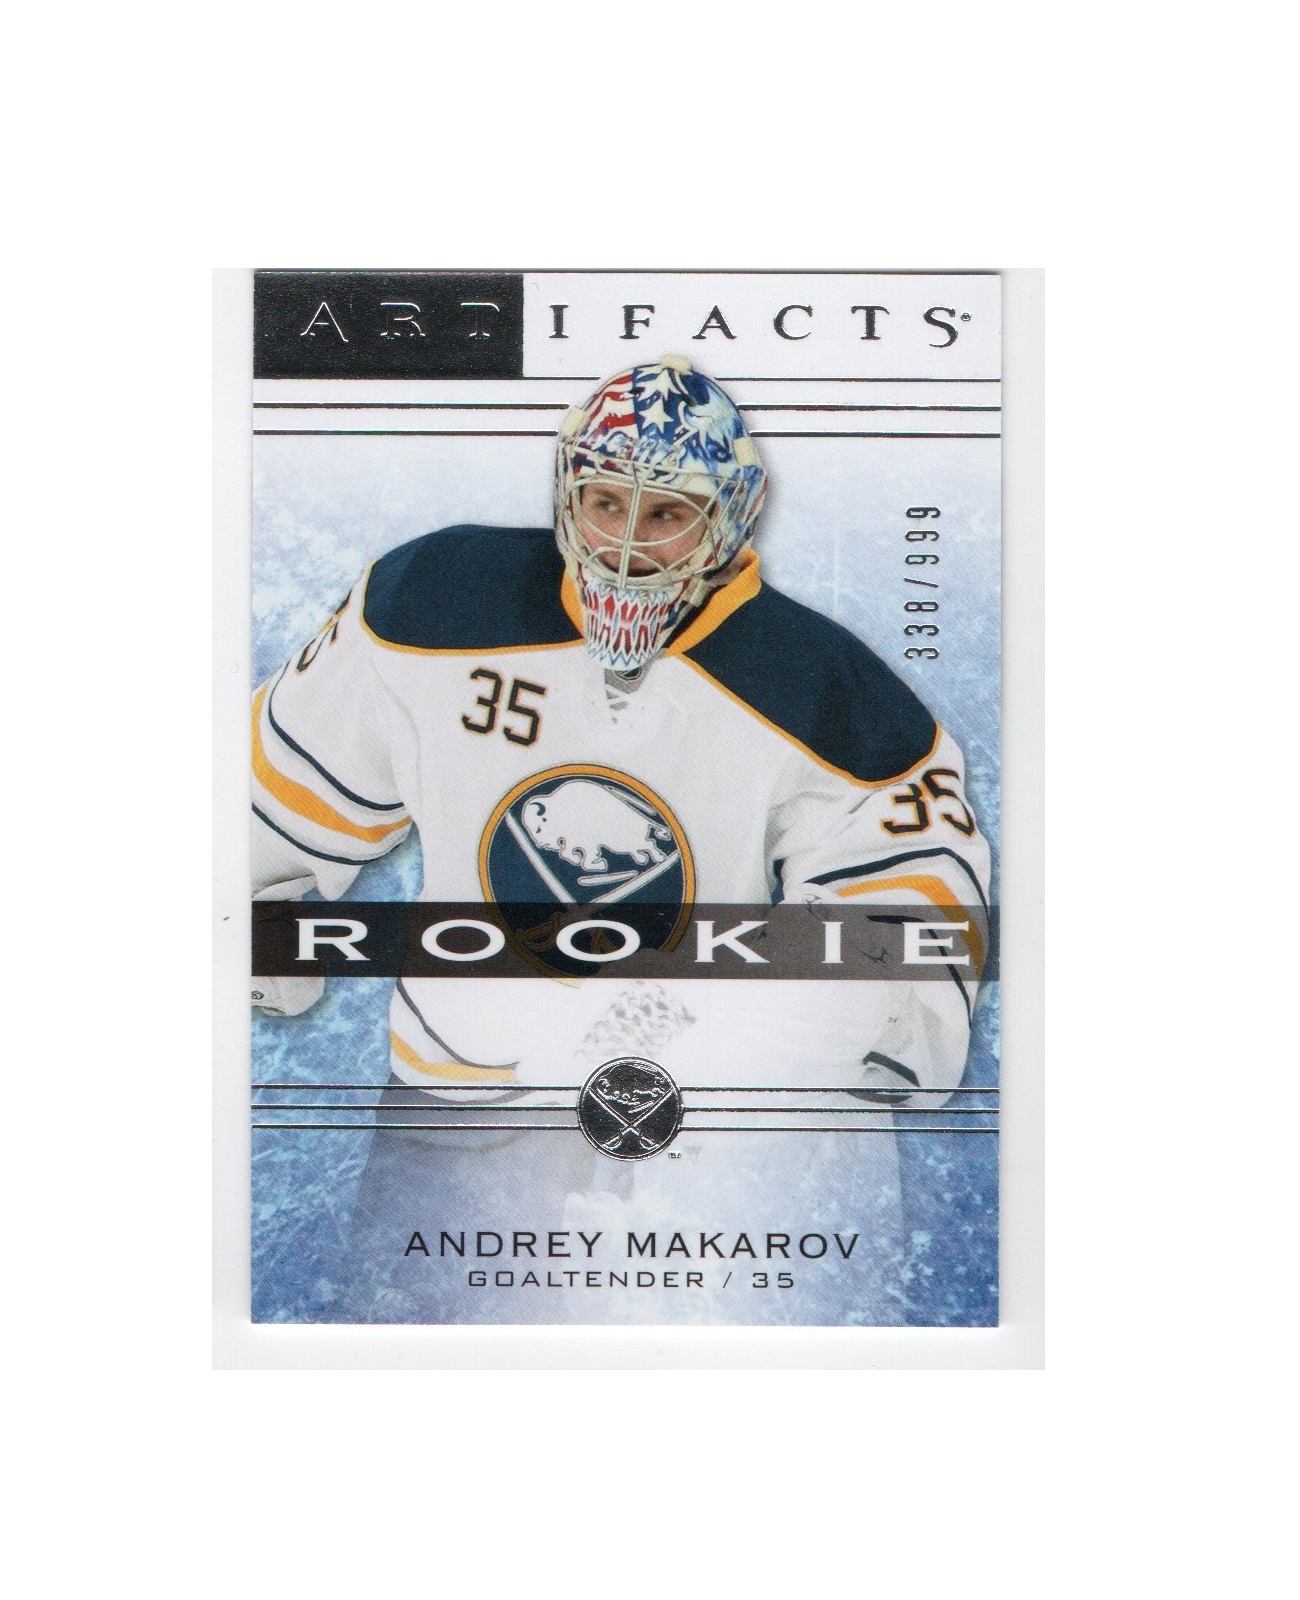 2014-15 Artifacts #128 Andrey Makarov RC (15-X6-SABRES)